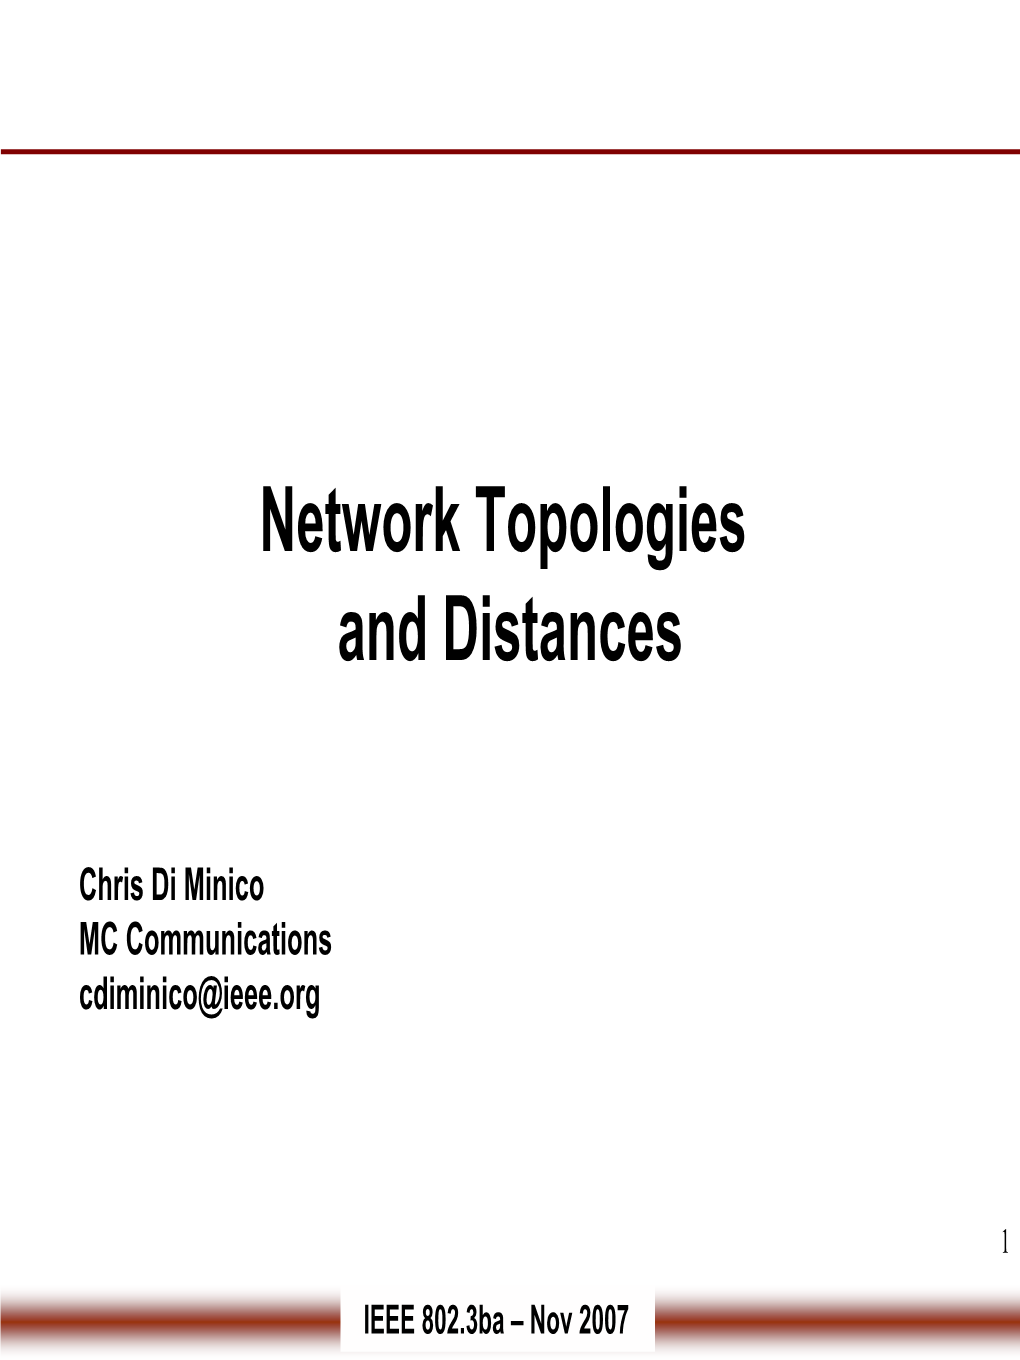 Network Topologies and Distances